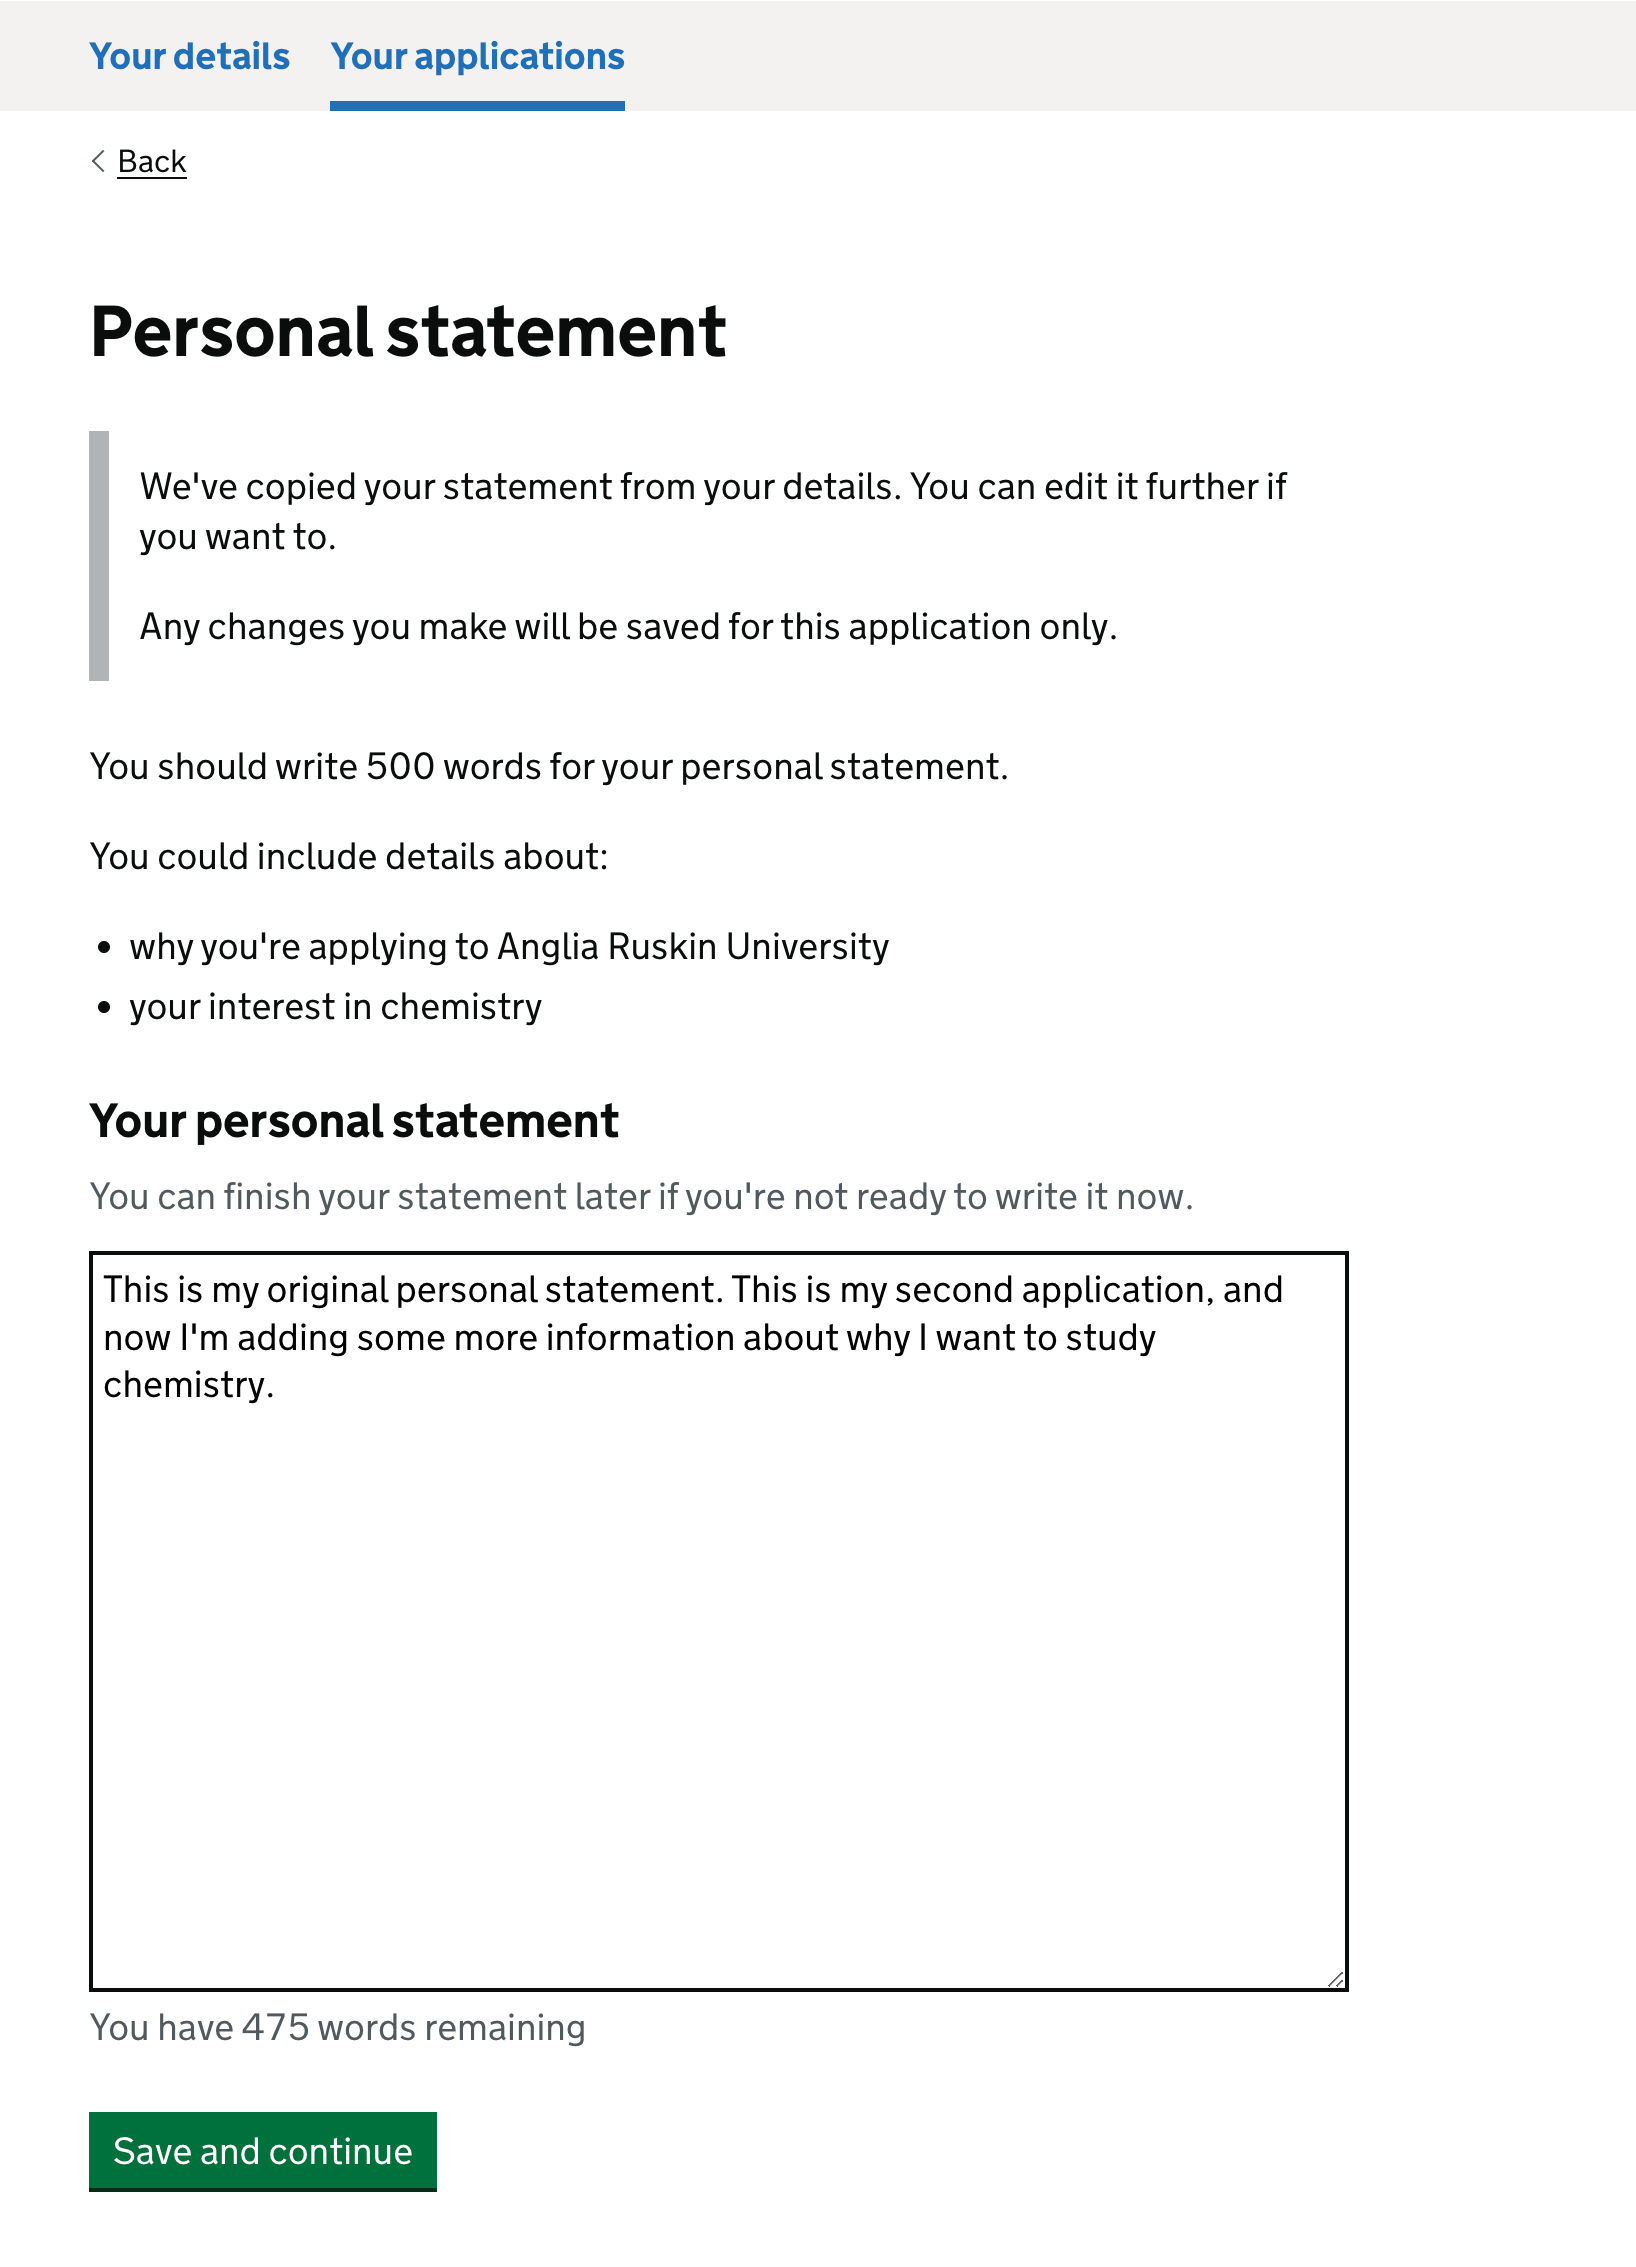 Screenshot of the personal statement question in the 'Your applications' tab. For the candidates second application, we show inset text again telling the candidate we've copied their 'master' version of the statement and they can edit it further. Any changes they make will only show for this application.